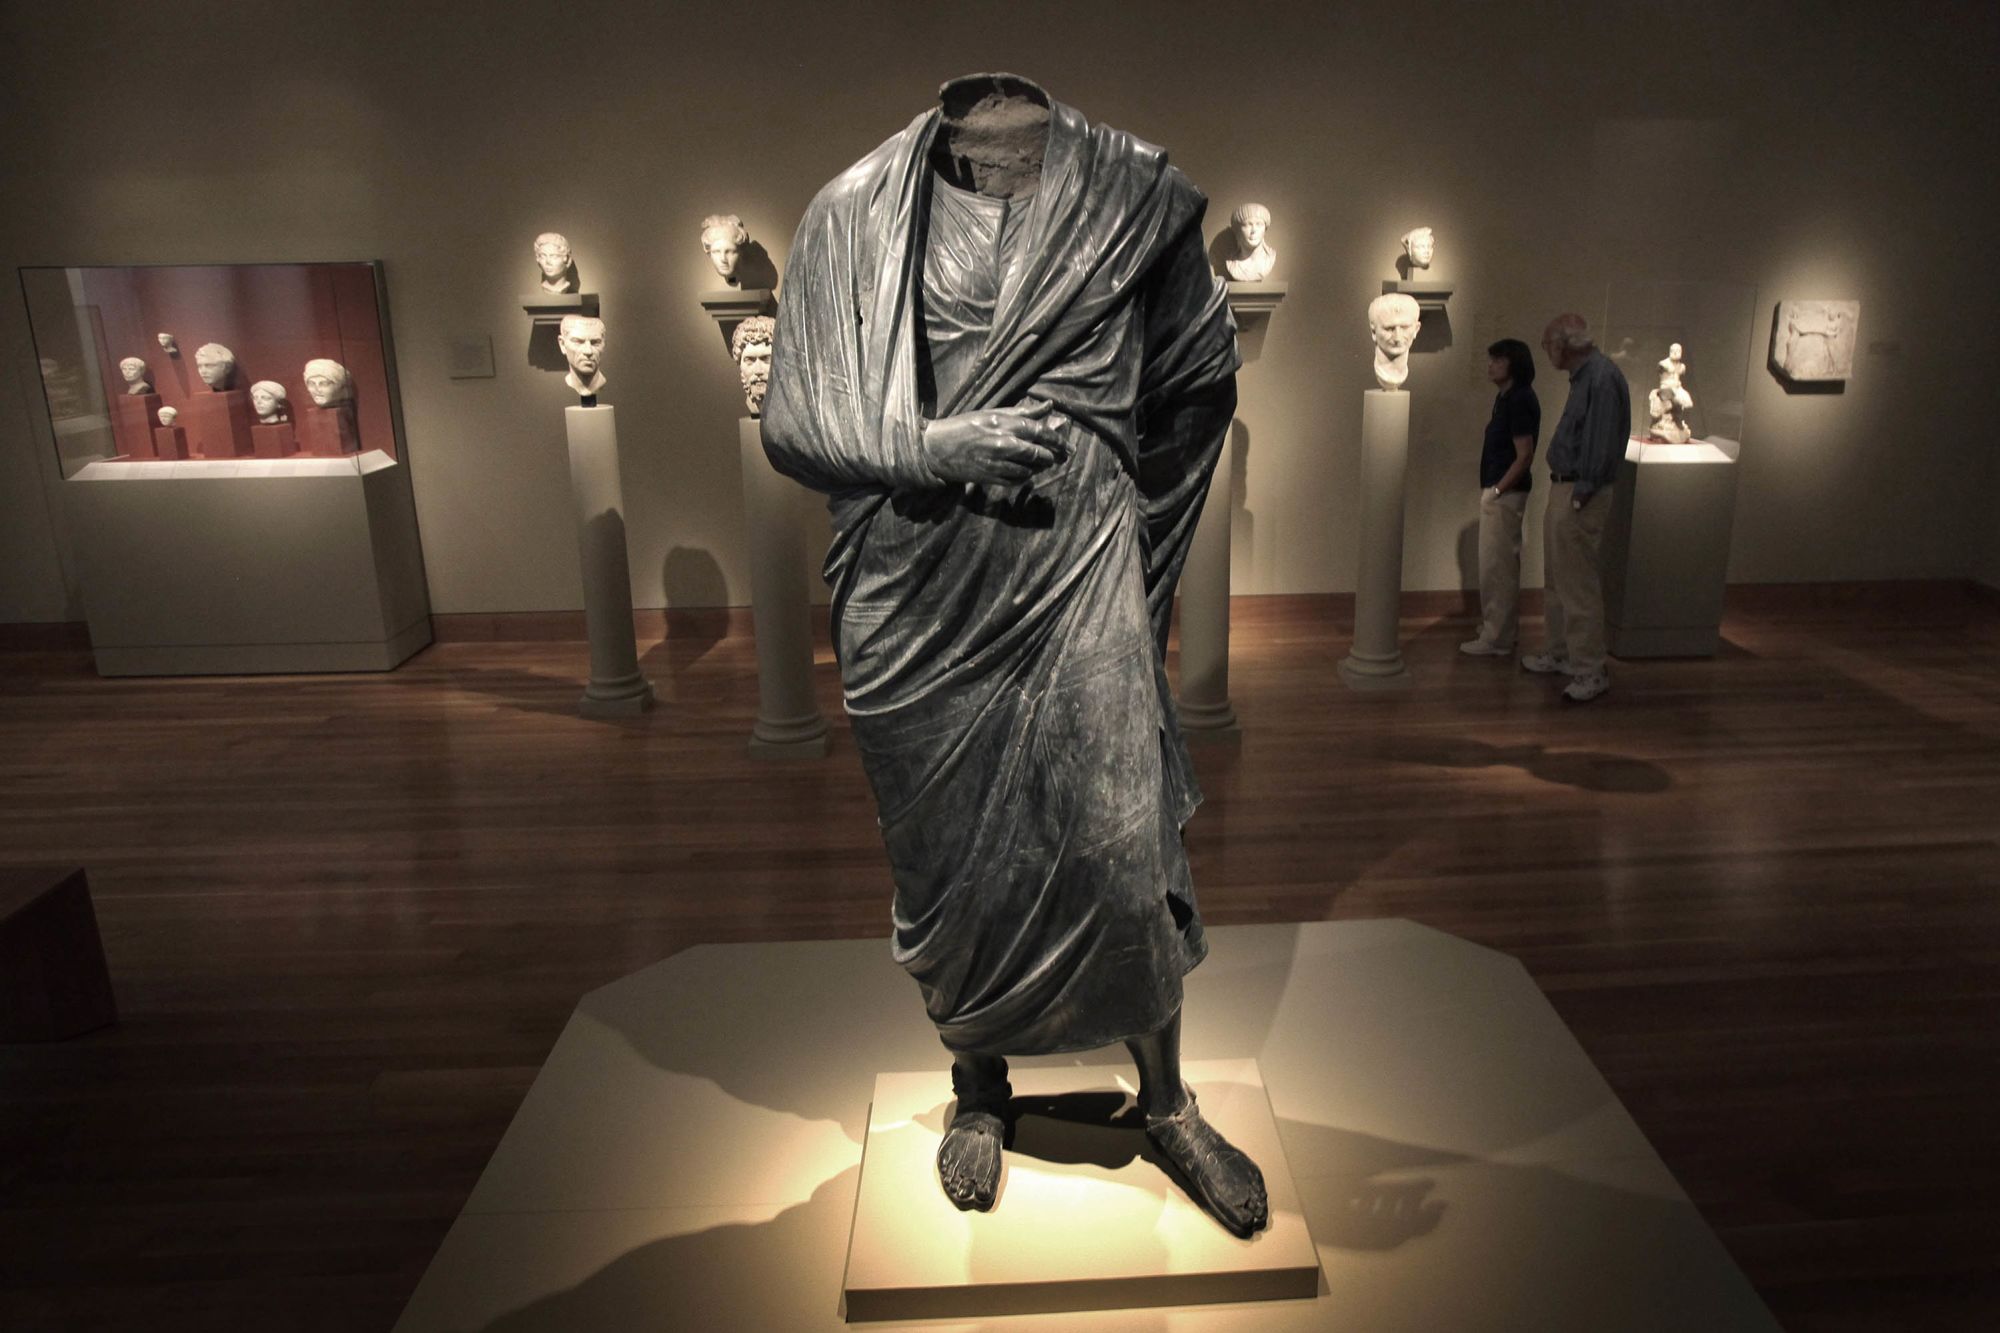 The headless statue, which some scholars believe depicts Marcus Aurelius, on display at the Cleveland Museum of Art in 2010.